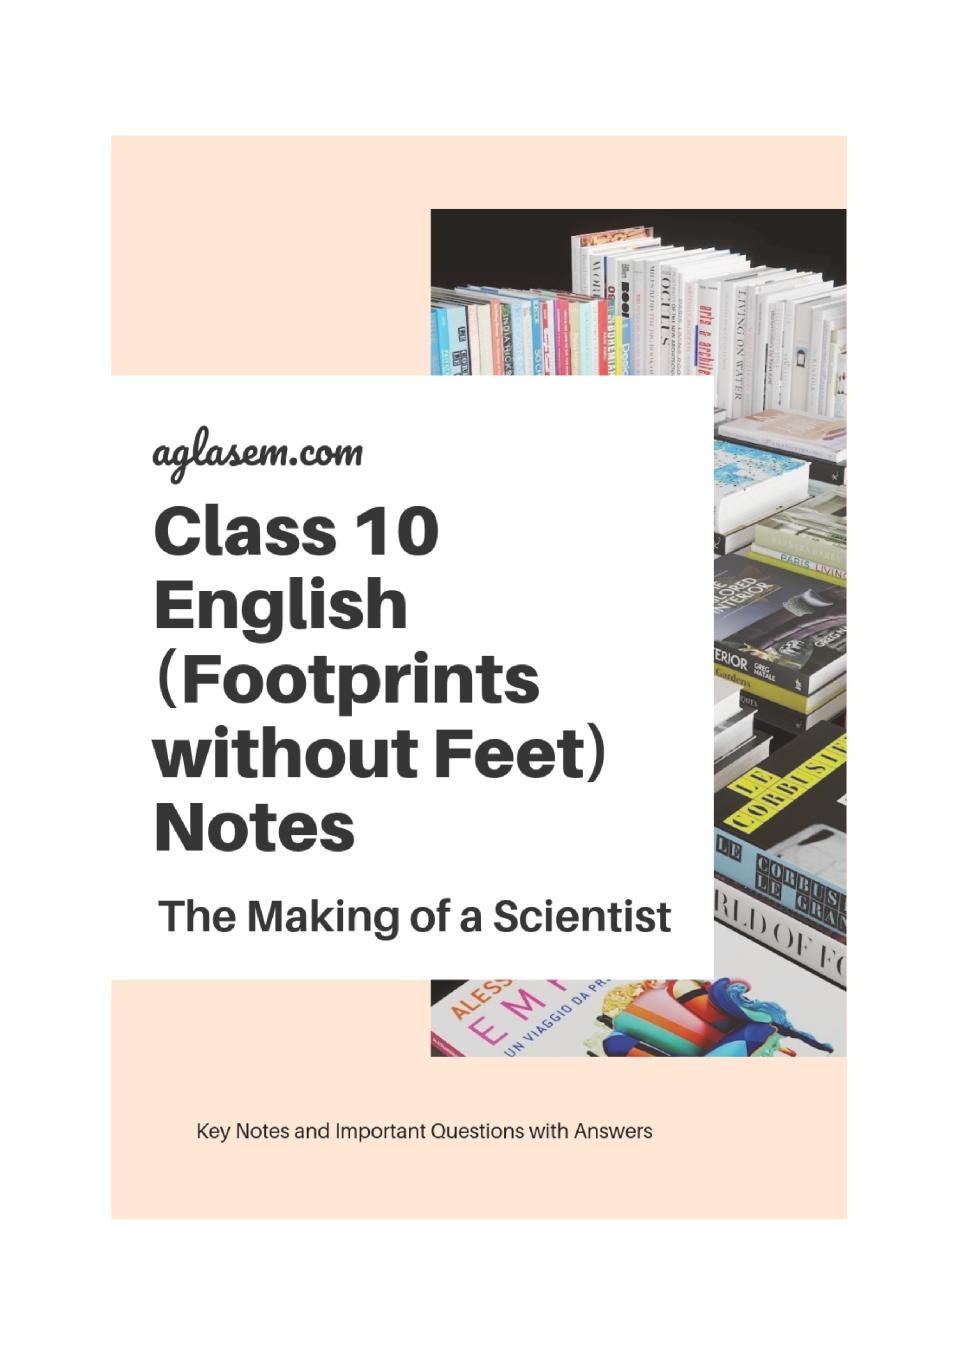 Class 10 English Footprints without Feet Notes For The Making of a Scientist - Page 1